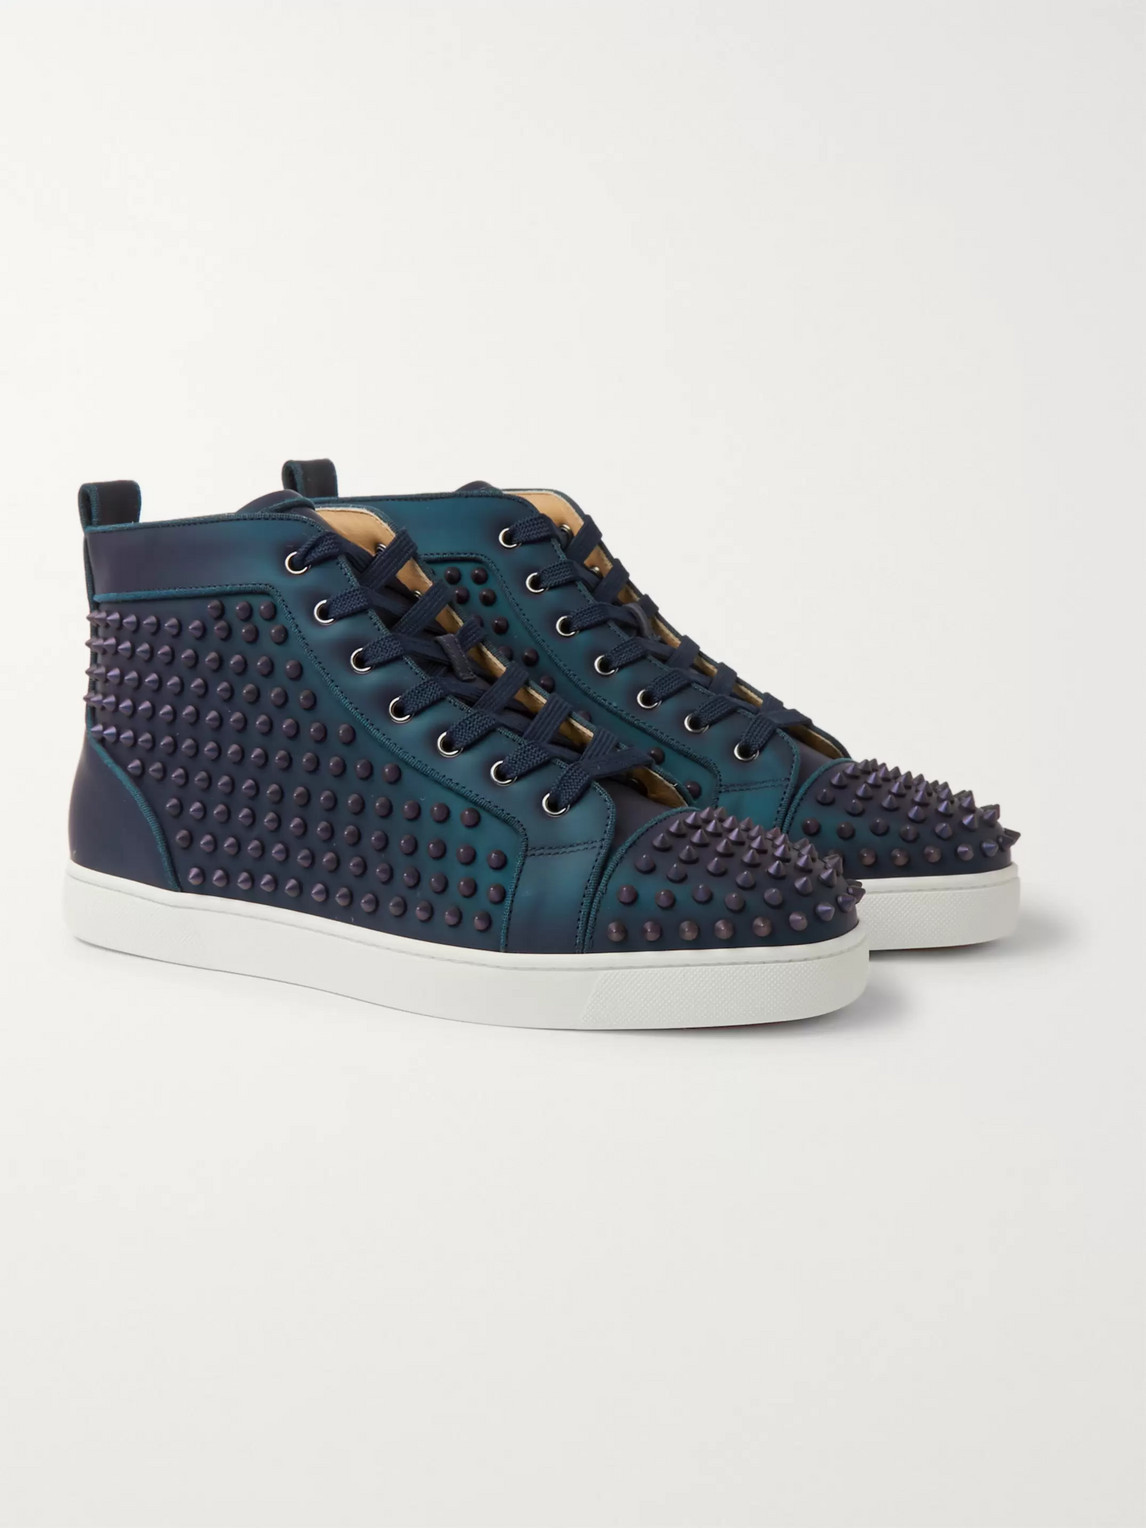 CHRISTIAN LOUBOUTIN LOUIS ORLATO SPIKES IRIDESCENT LEATHER HIGH-TOP SNEAKERS